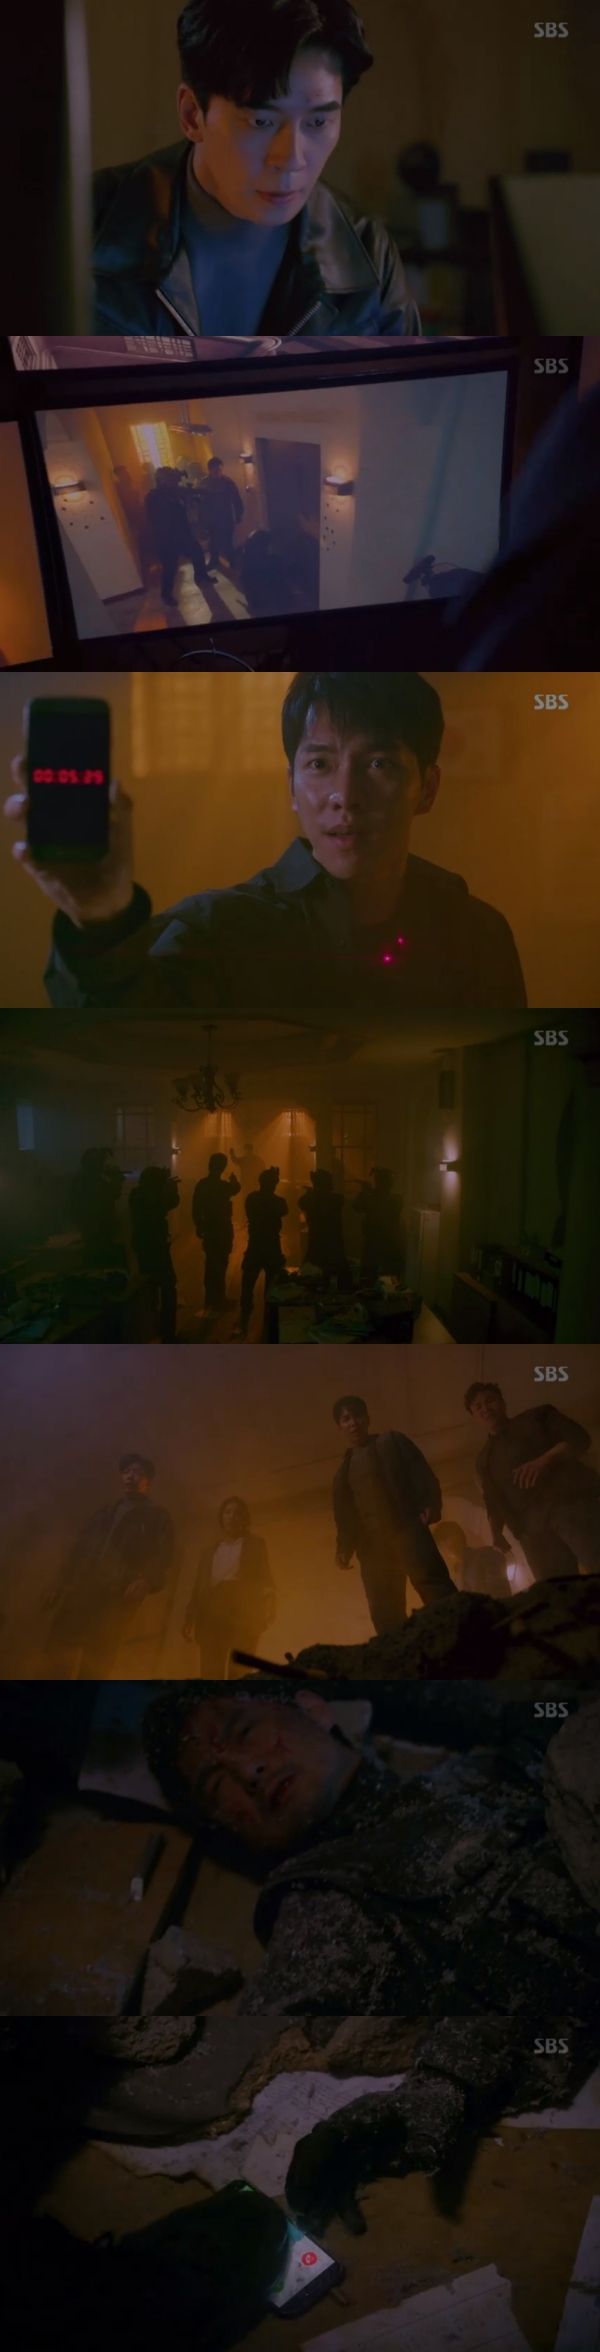 Shin Sung-rok went against the order and helped Lee Seung-gi.In the 10th episode of SBSs gilt drama Vagabond (playplayed by Jang Young-chul, directed by Yoo In-sik), which was broadcast on the 19th, Gitaewoong (Shin Sung-rok) showed the image of being against and protecting the support group targeting Lee Seung-gi.On this day, the support team of Kitaewoong was Cha Dal-gun and Kim if Assassination.So Gohari (basin) and Gitaewoong stood on the side of Chadalgun and Kim if, against the orders of the upper part.Chadalgan, facing the Assassination group, showed off the bomb device and bought time to fly all over here if I dont stop the timer.Eventually the bomb exploded, and Kitaewoong pointed the gun at the last remaining Assassination group.The Assassination Group breathed for Gitaewoong, calling him a traitor.You are the only one who will take on a big mission, Gitaewoong said in a statement, saying, Ahn is the director.We did not kill him, we were lucky to survive, Gitaewoong said, directing his team member to Ji-woo.